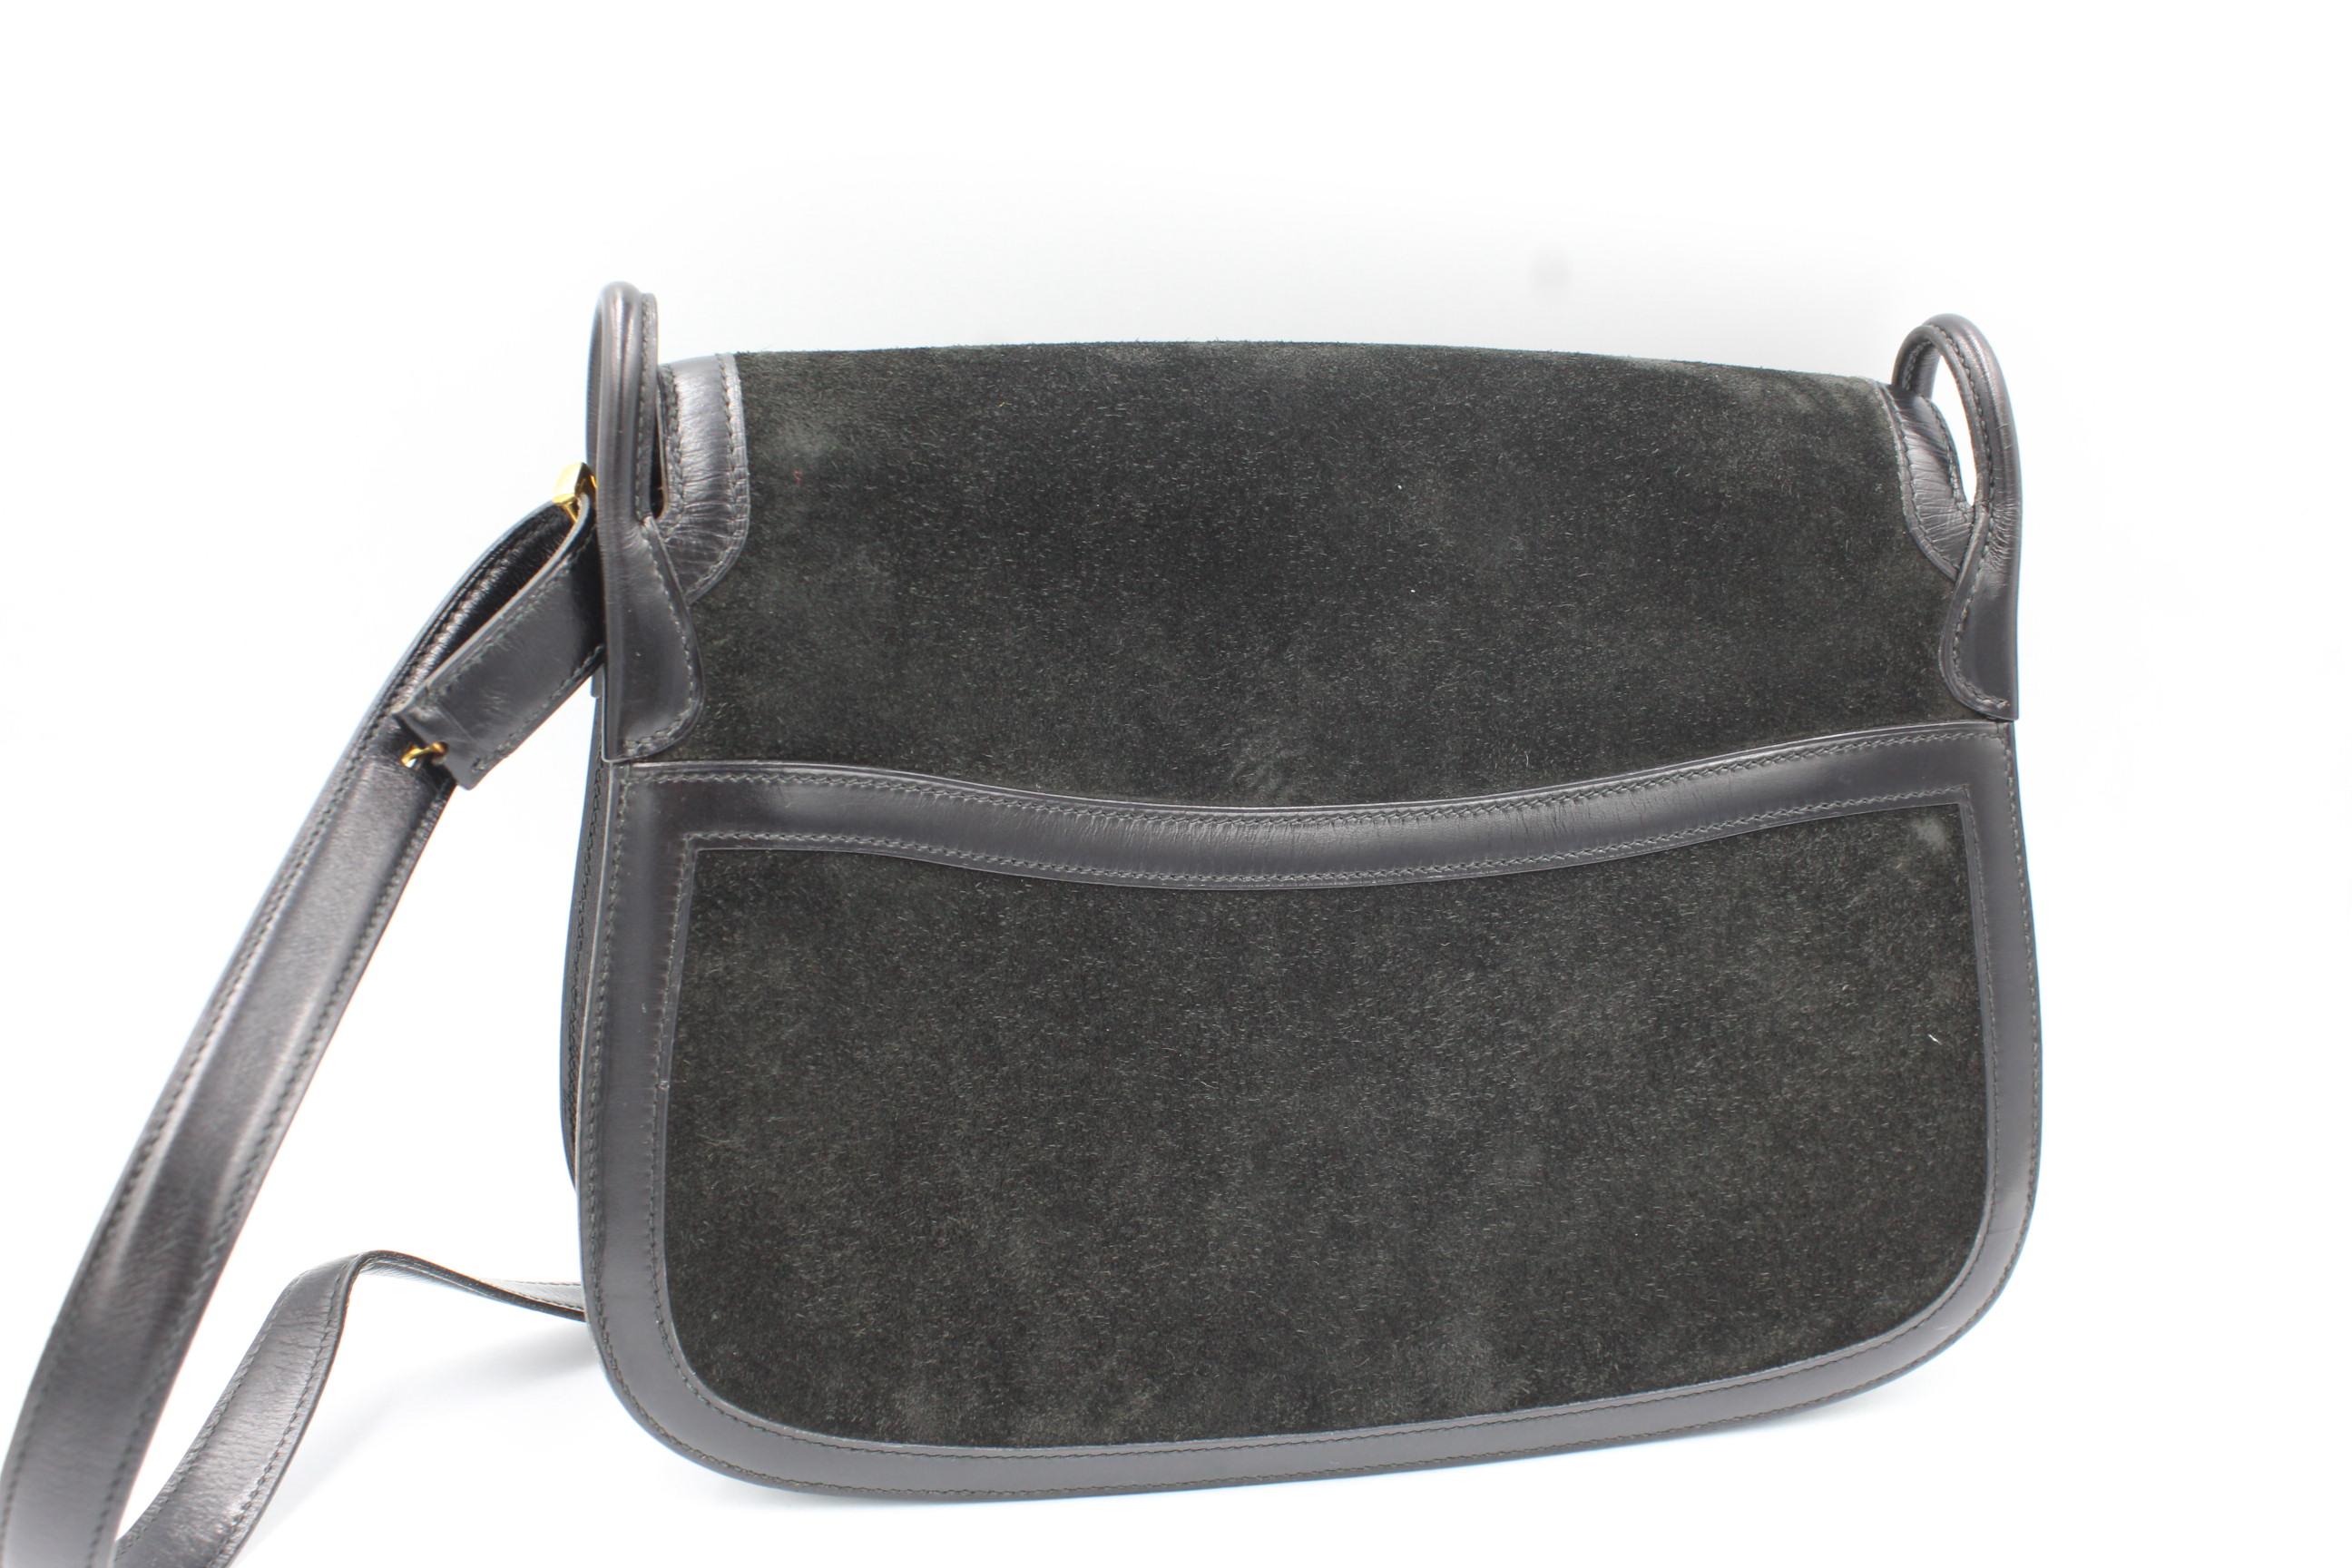 Vintage Hermès handbga with shoulder strap in black leather and suede.
1980. 
Good condition, with some light signs of wear at the corners and on the leather. 
Shoulder strap : 85cm.
20cm x 28cm x 8cm